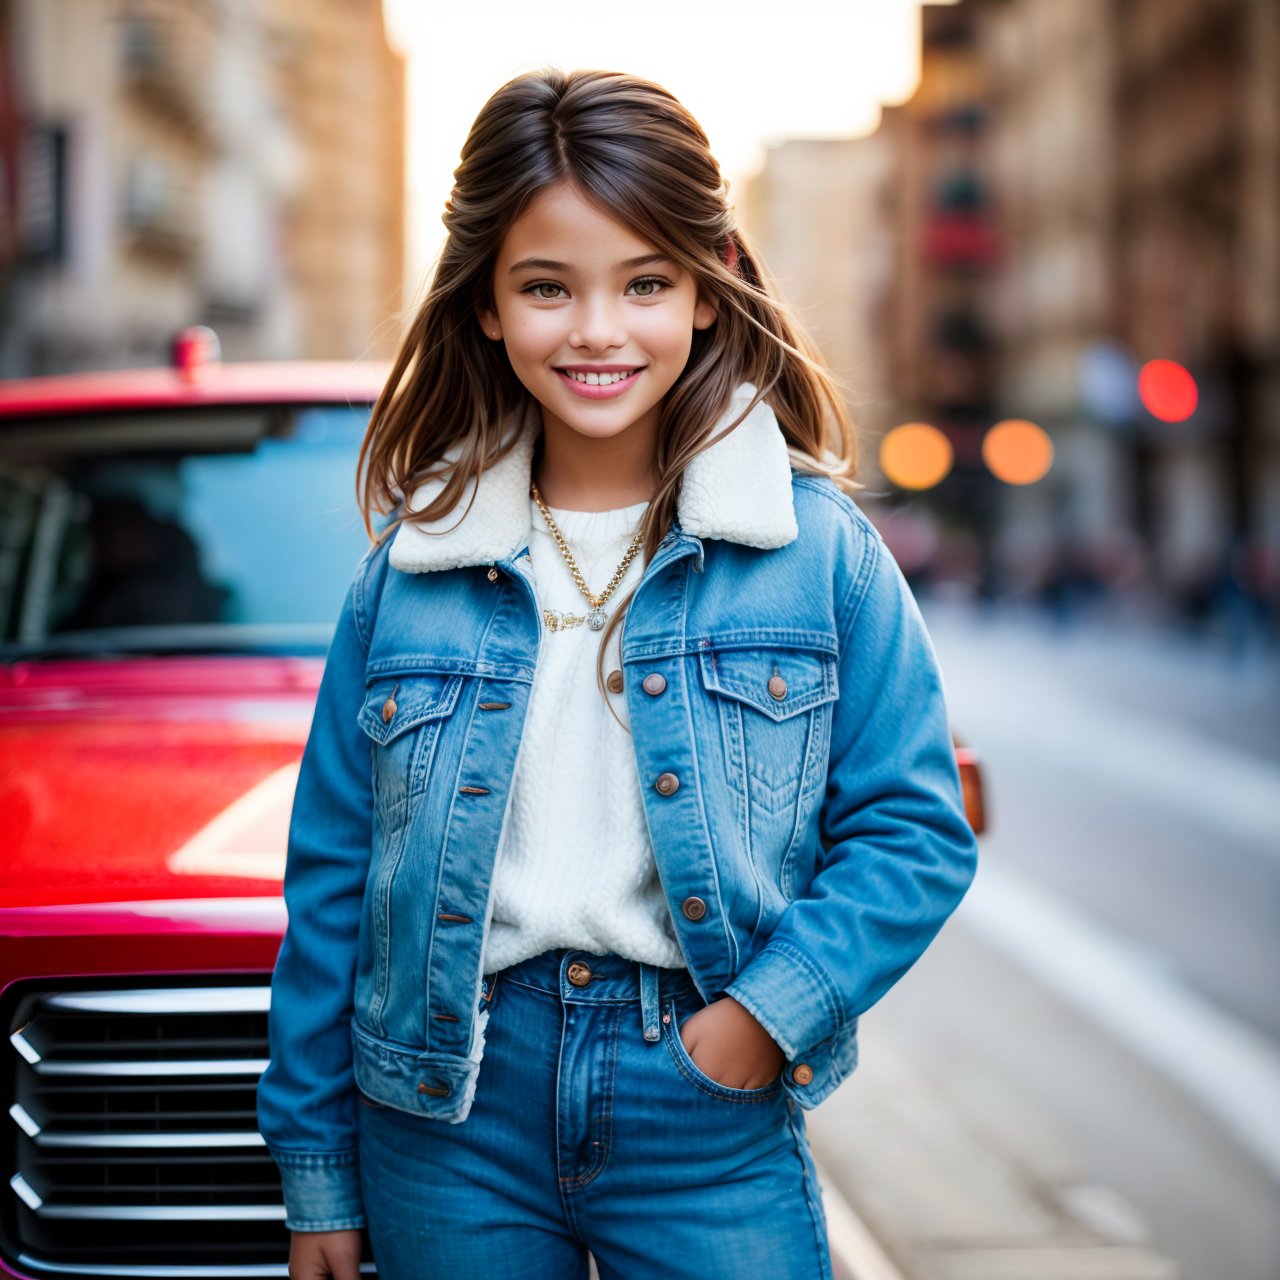 wallpaper, looking back, full body portrait of smiling (AIDA_LoRA_LG2014:1.07) <lora:AIDA_LoRA_LG2014:0.78> as little girl wearing a sherpa jacket and jeans posing in front of the car, on the street, pretty face, naughty, funny, happy, playful, intimate, flirting with camera, dramatic, composition, studio photo, studio photo, kkw-ph1, hdr, f1.7, getty images, (colorful:1.1)